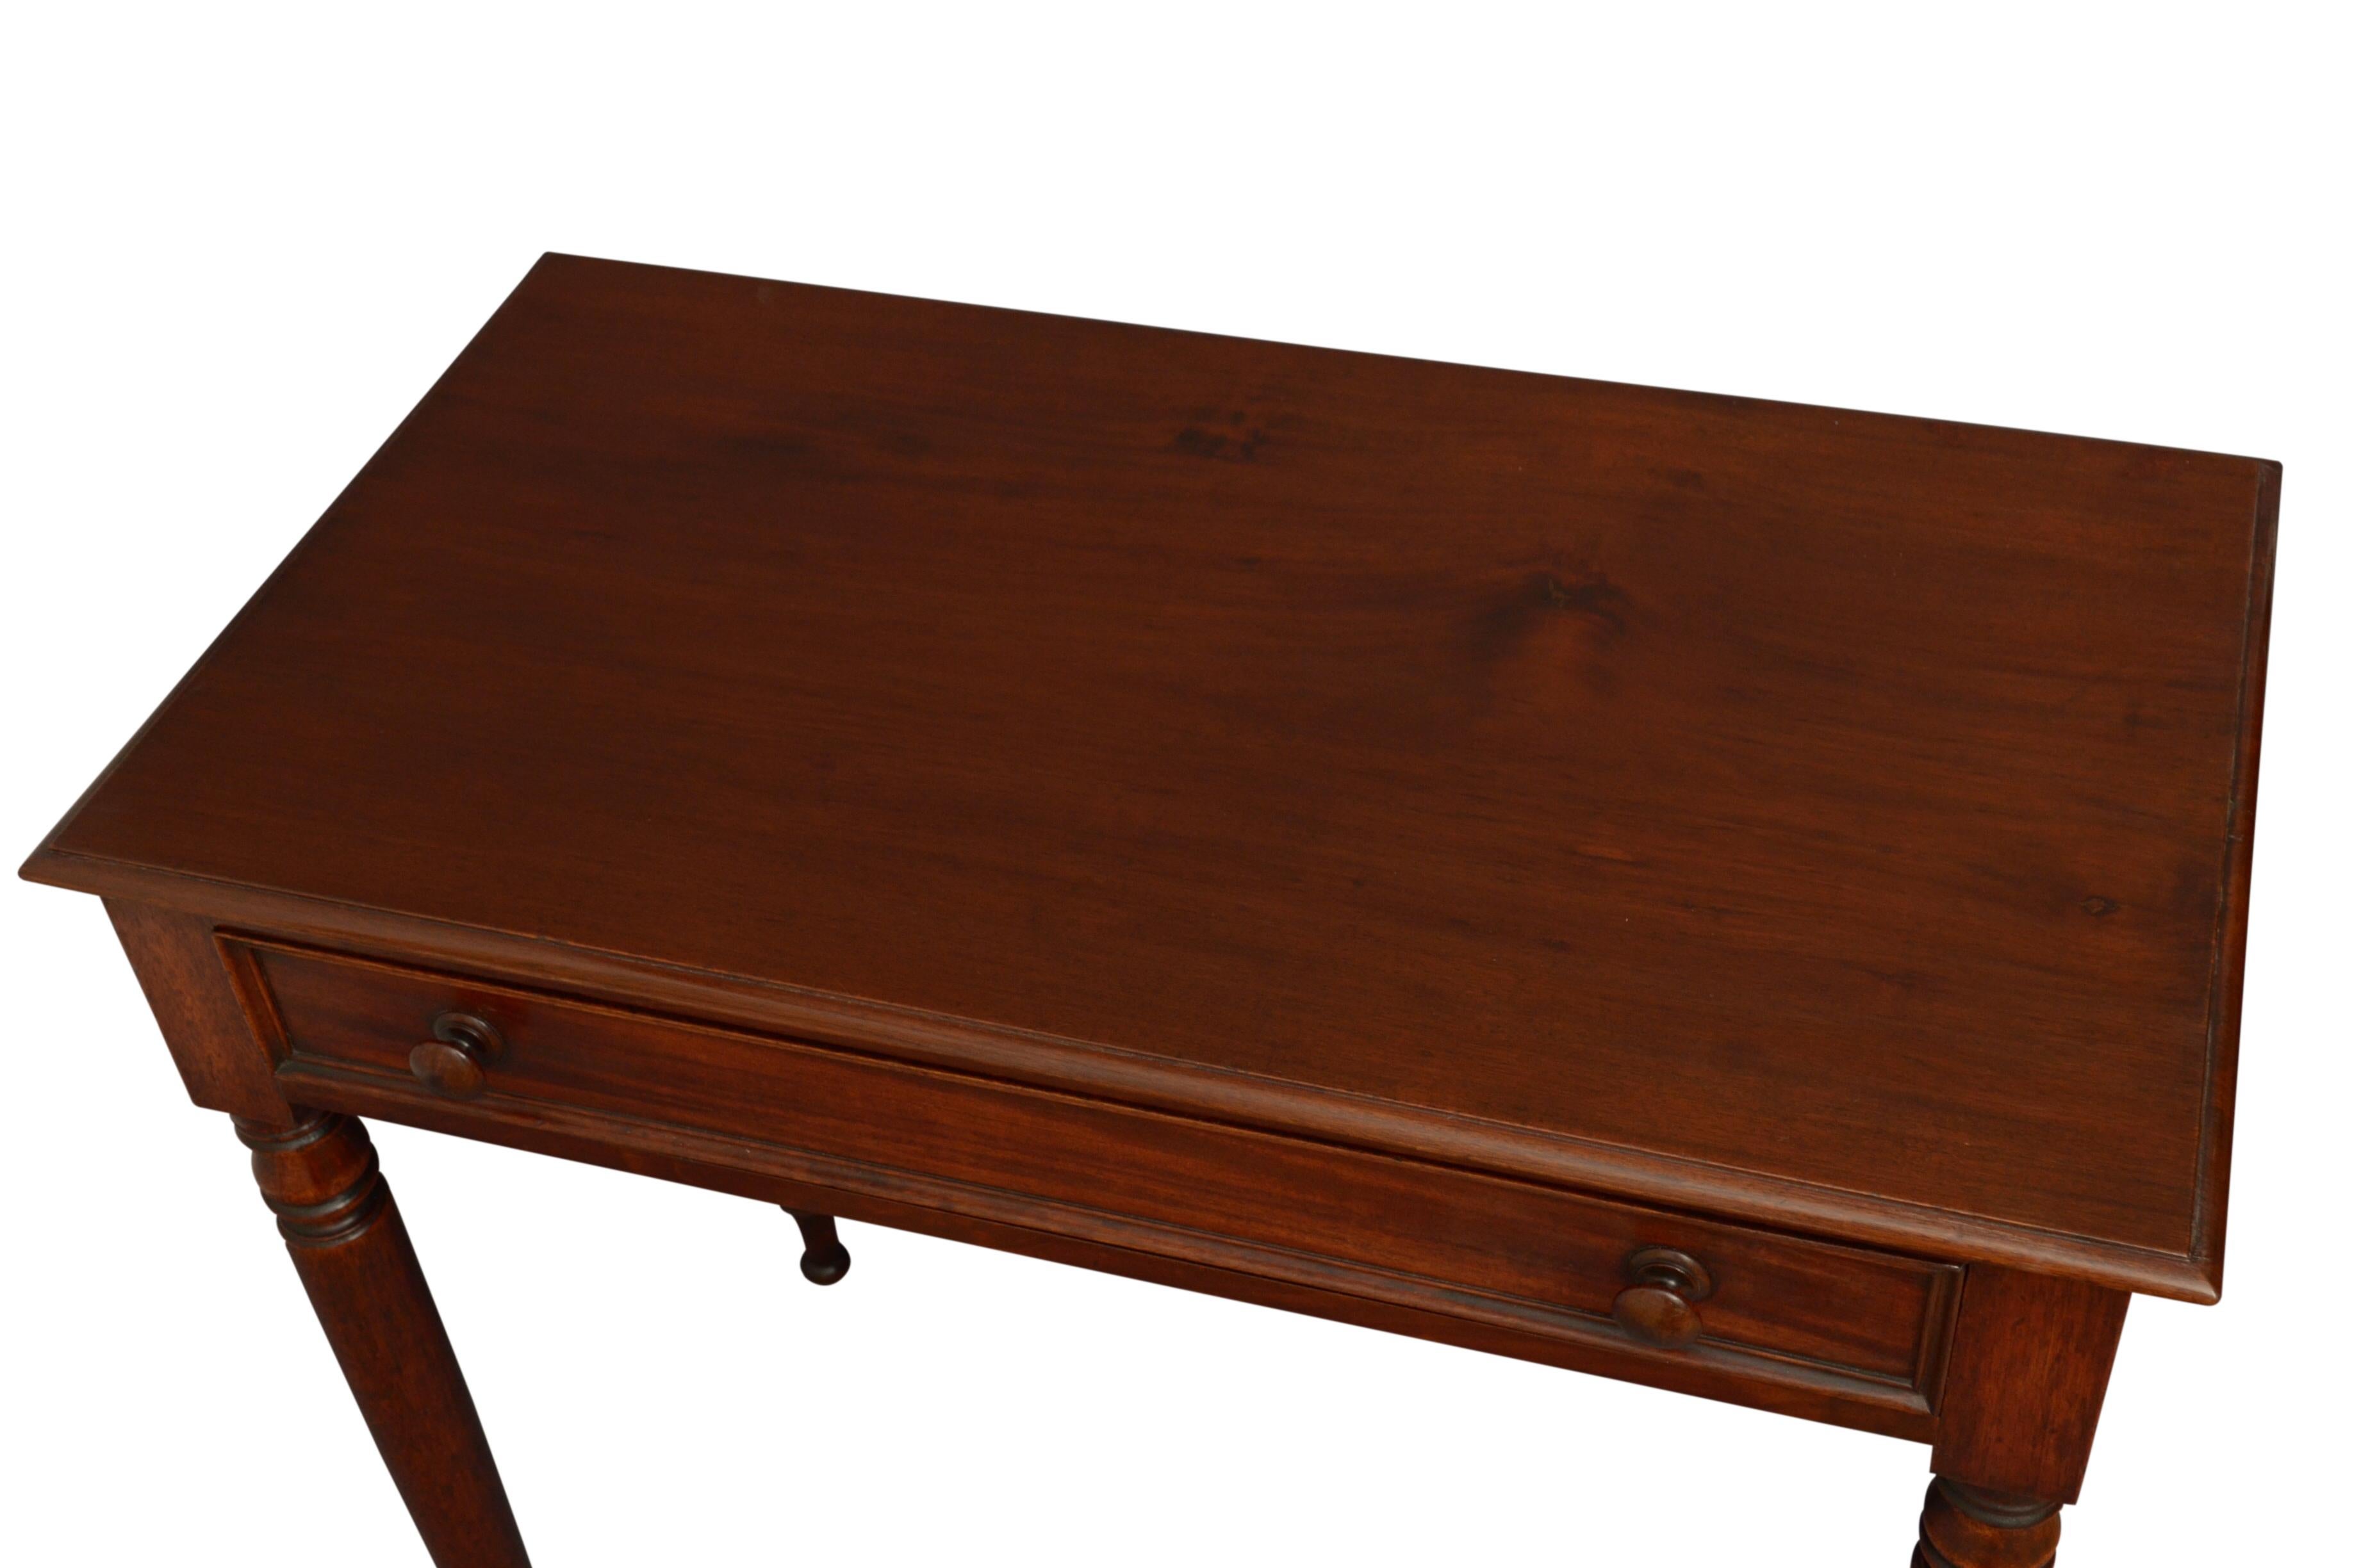 P0133 simple and elegant Victorian side table or a lamp table, having solid mahogany top with moulded edge above an oak lined moulded drawer fitted with original turned knobs, all standing on turned and carved legs. This antique table would make a